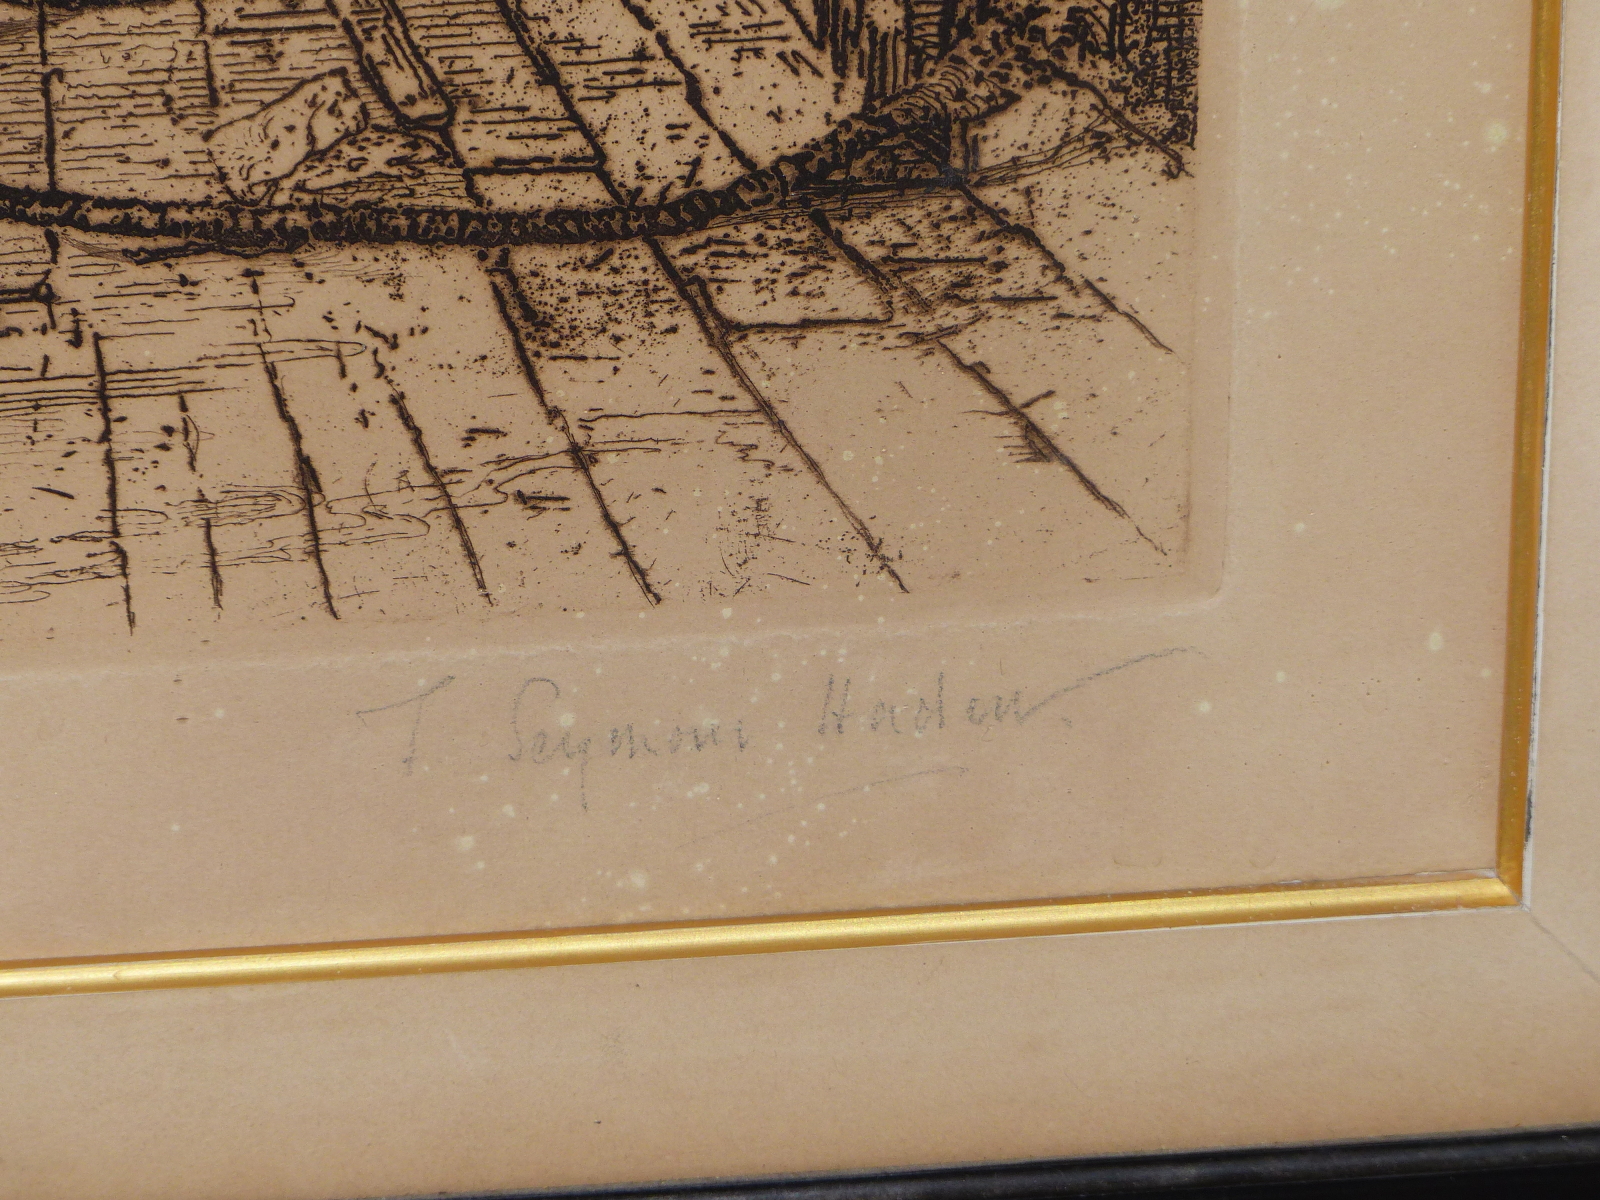 FRANCIS SEYMOUR HADEN AFTER J.M.W. TURNER, CALAIS PIER, SIGNED IN PENCIL, ETCHING, 84 x 60cms pl. - Image 5 of 7